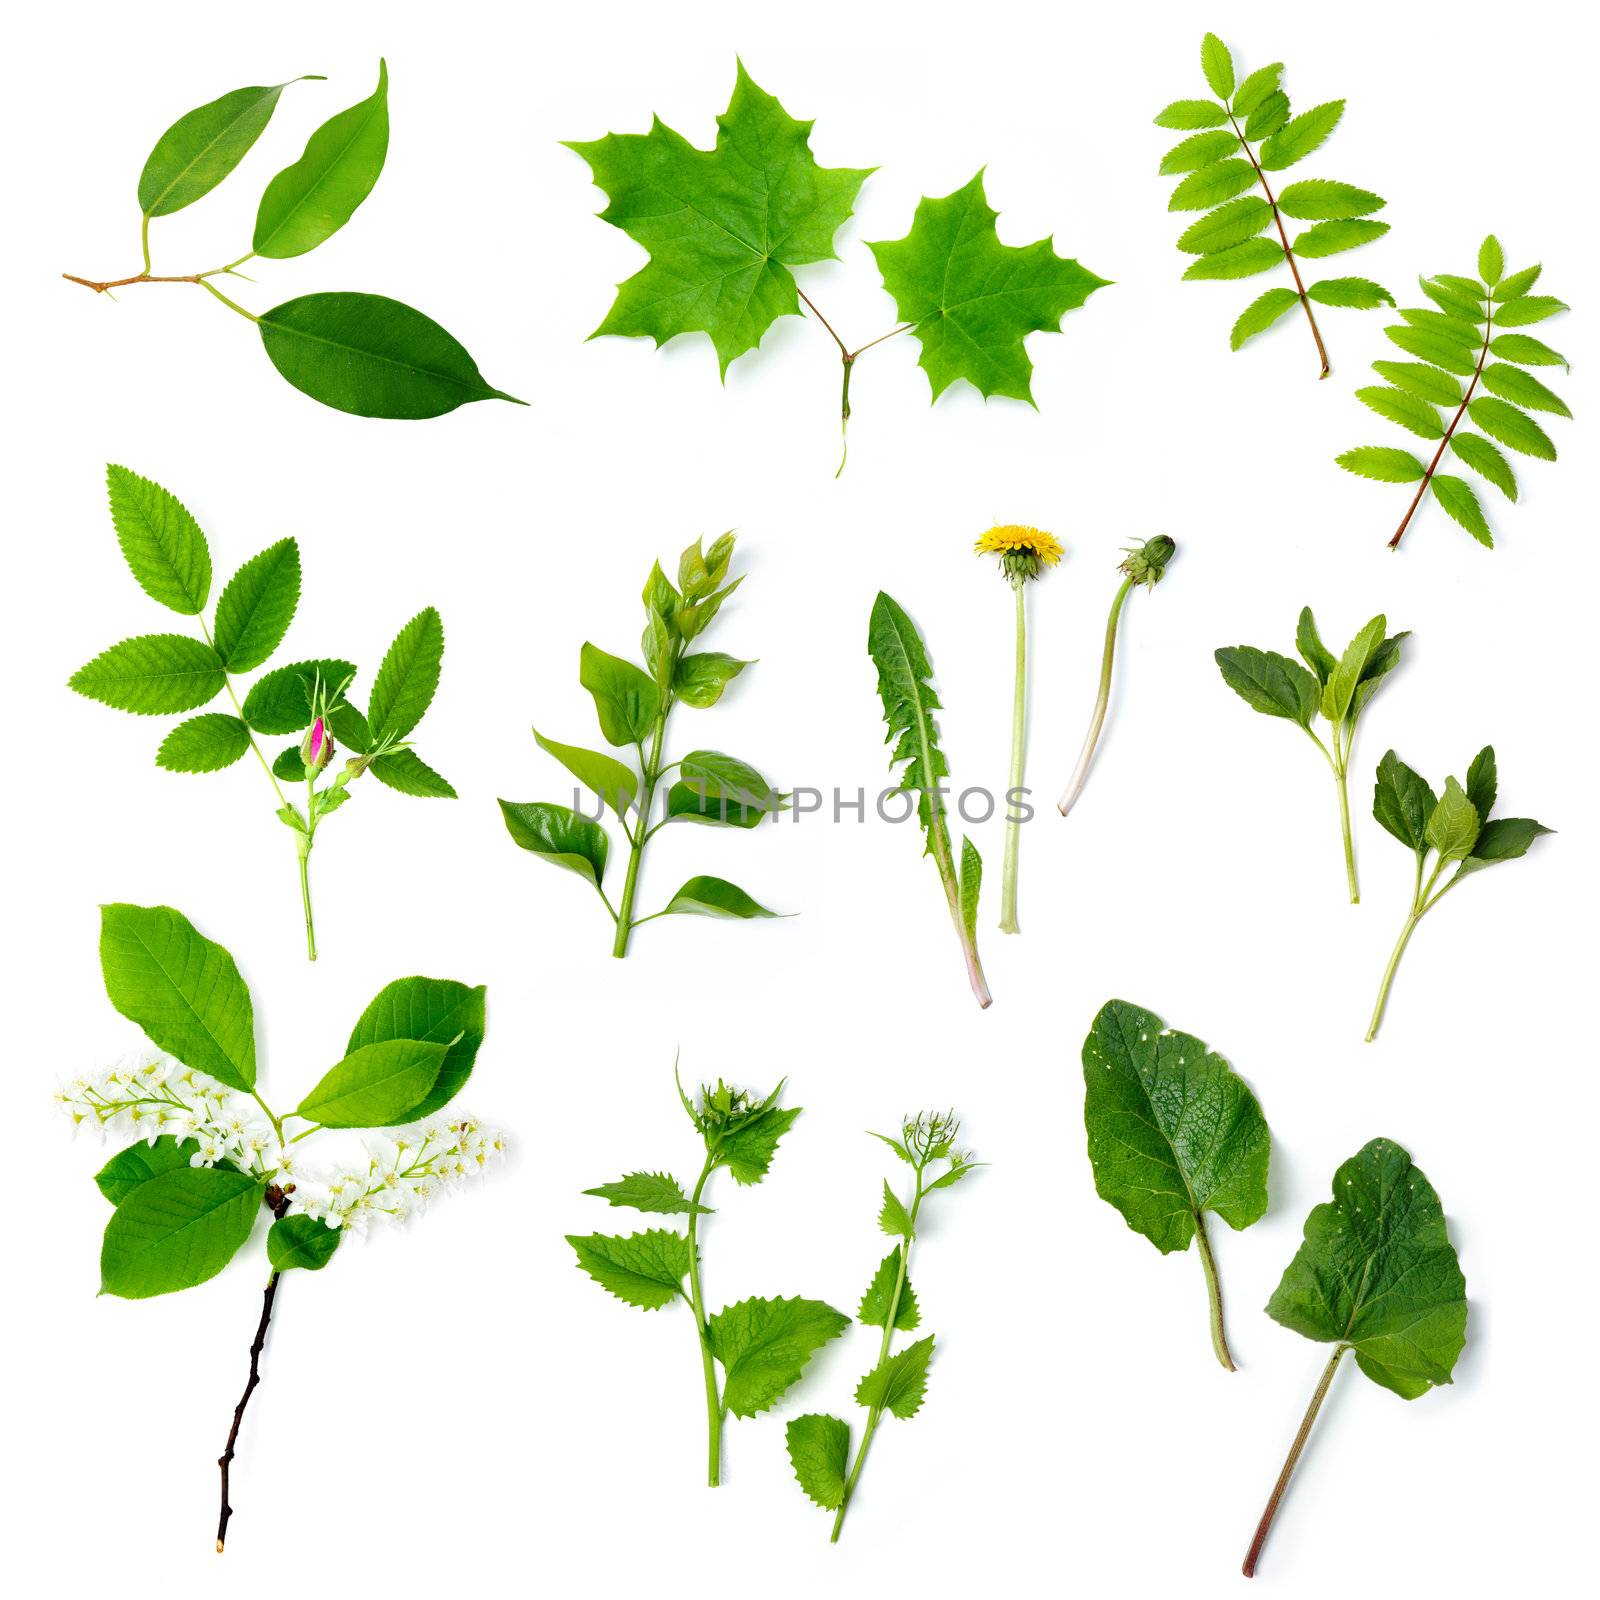 An image of a set of various green plants